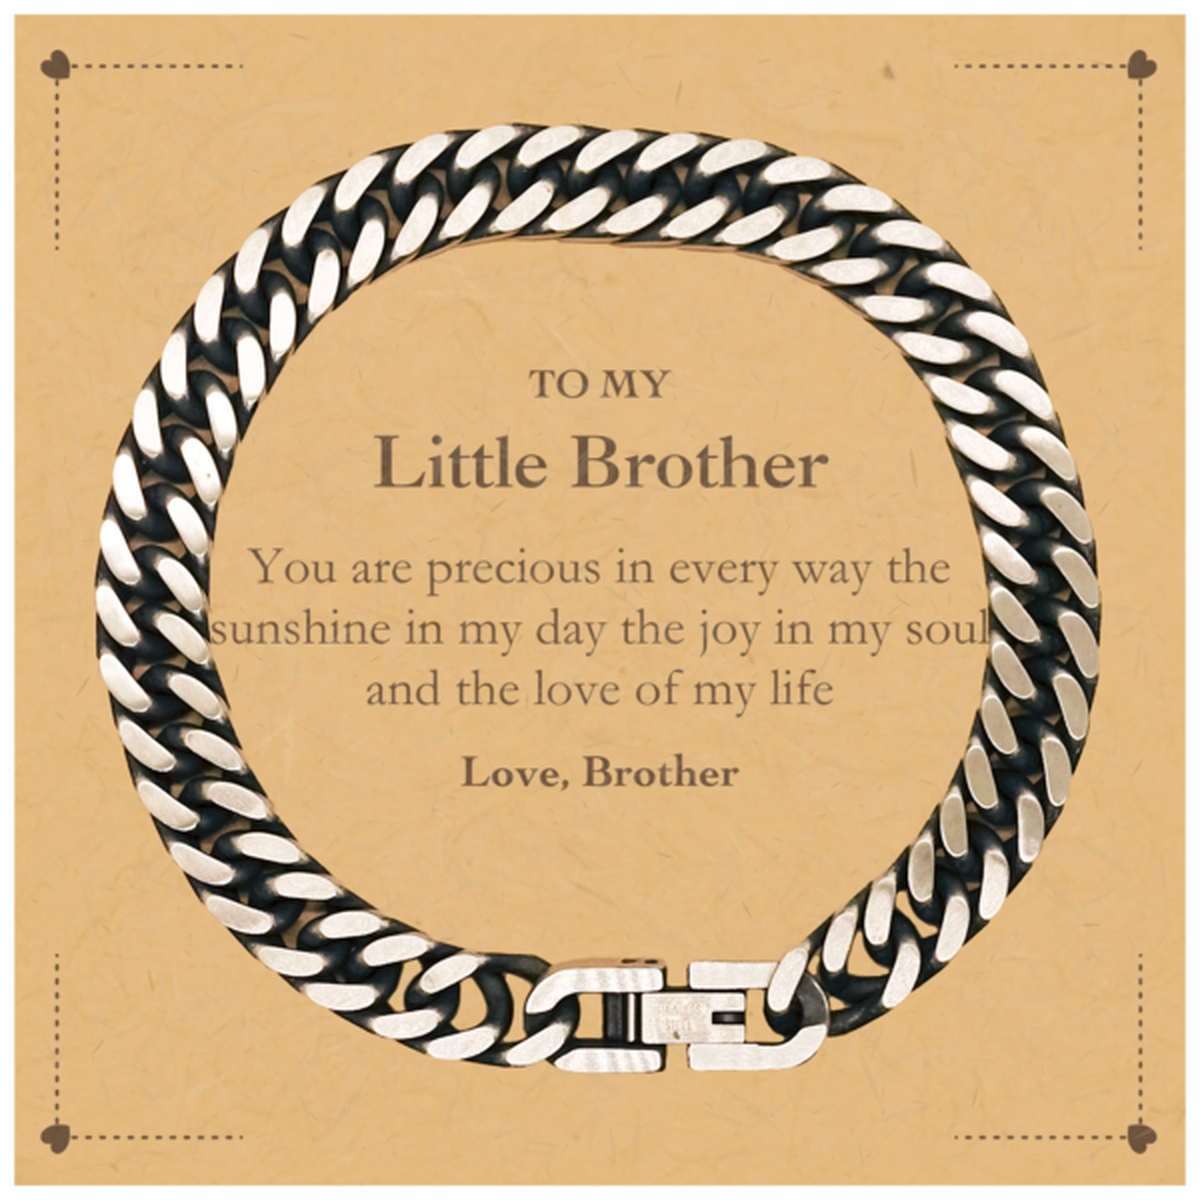 Graduation Gifts for Little Brother Cuban Link Chain Bracelet Present from Brother, Christmas Little Brother Birthday Gifts Little Brother You are precious in every way the sunshine in my day. Love, Brother